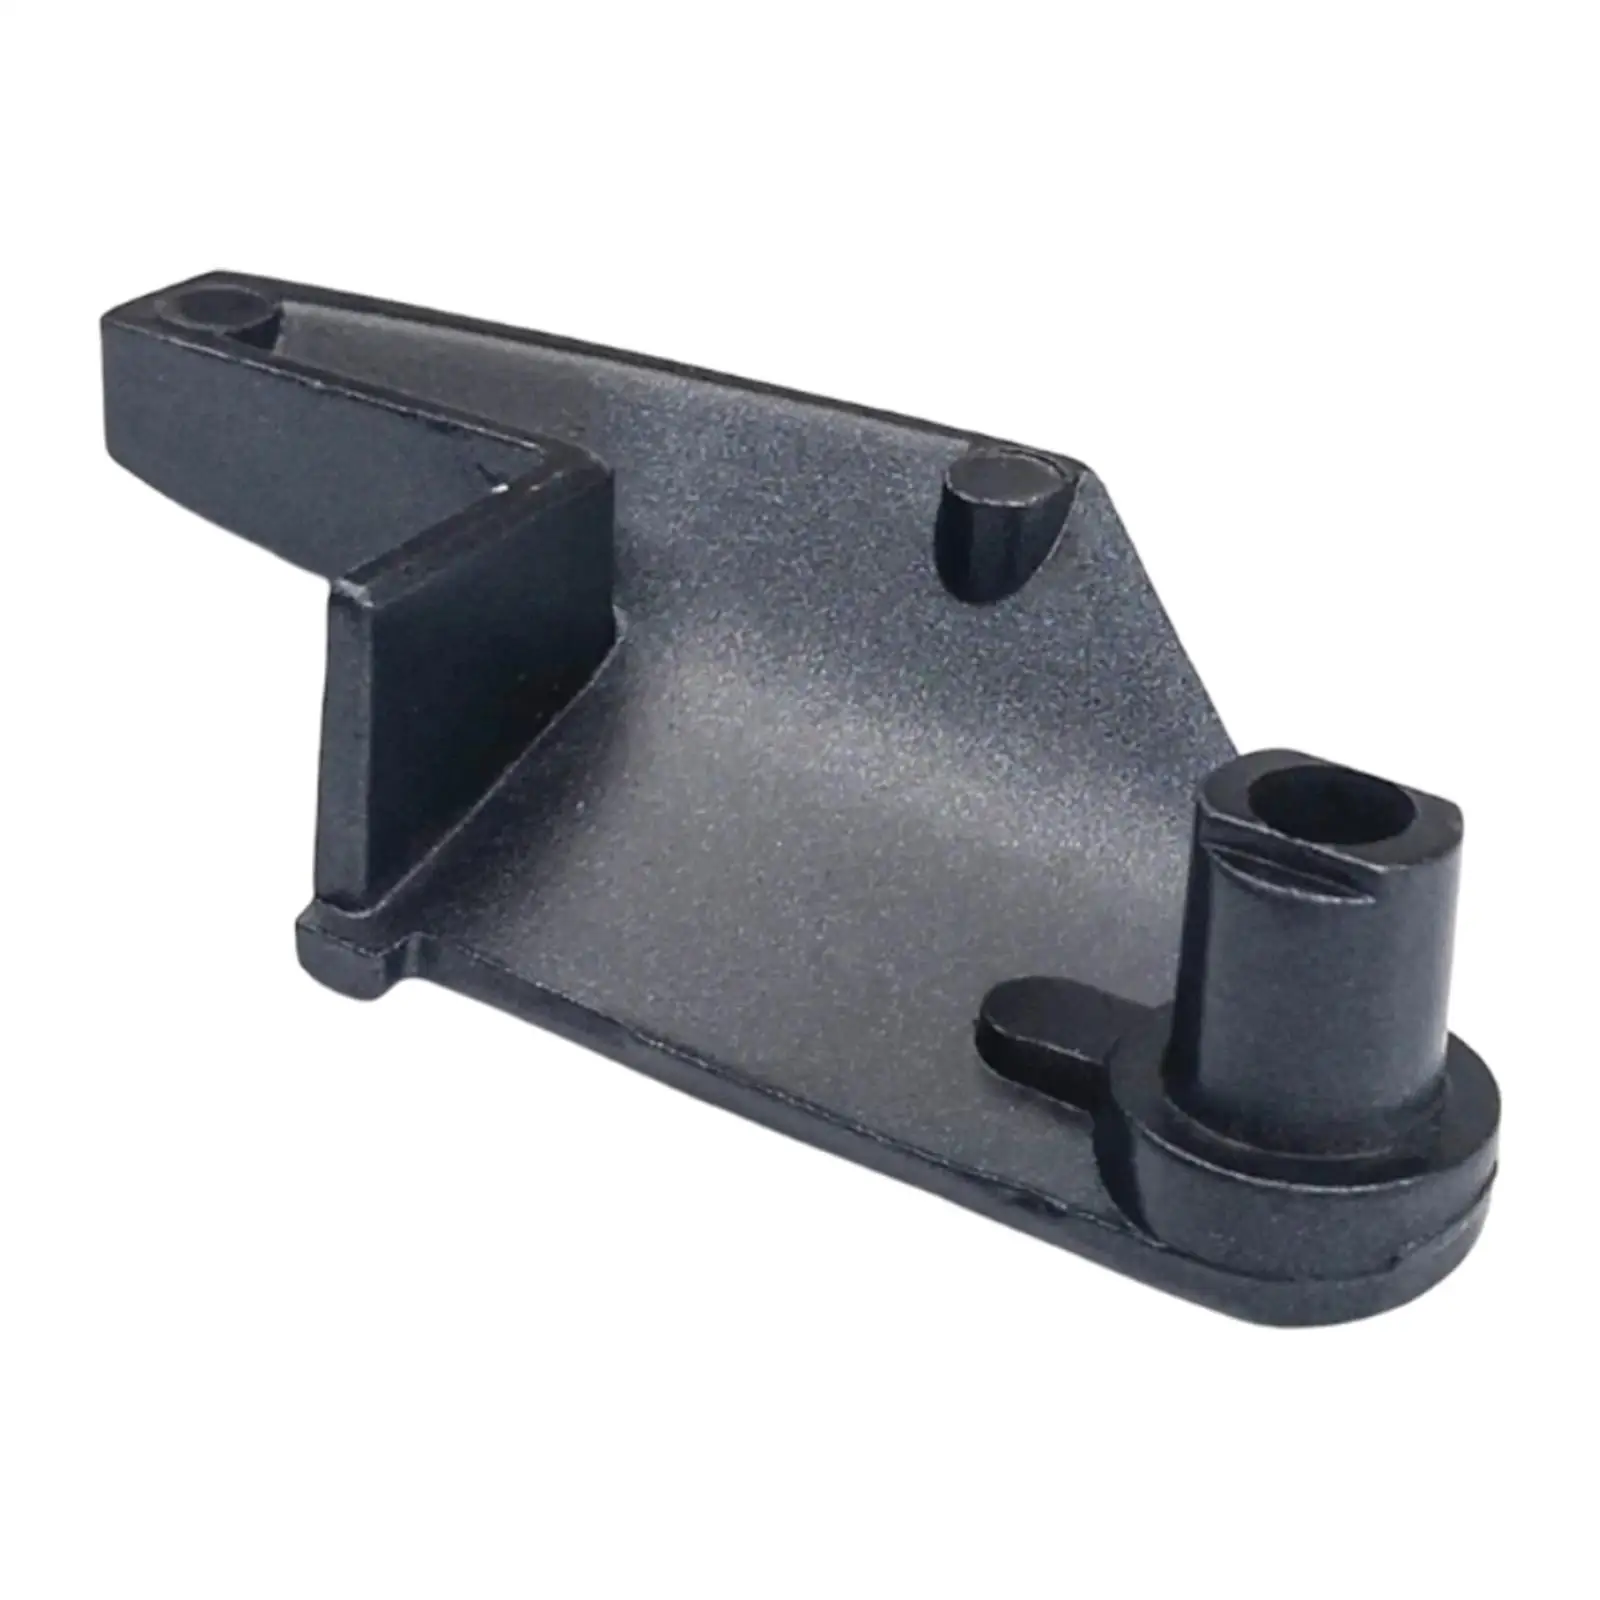 63V-42815 Premium Durable Spare Parts Accessories Lever Clamp 63V-42815-01-4D for Yamaha Outboard Motor 2 Stroke 9.9HP 15HP